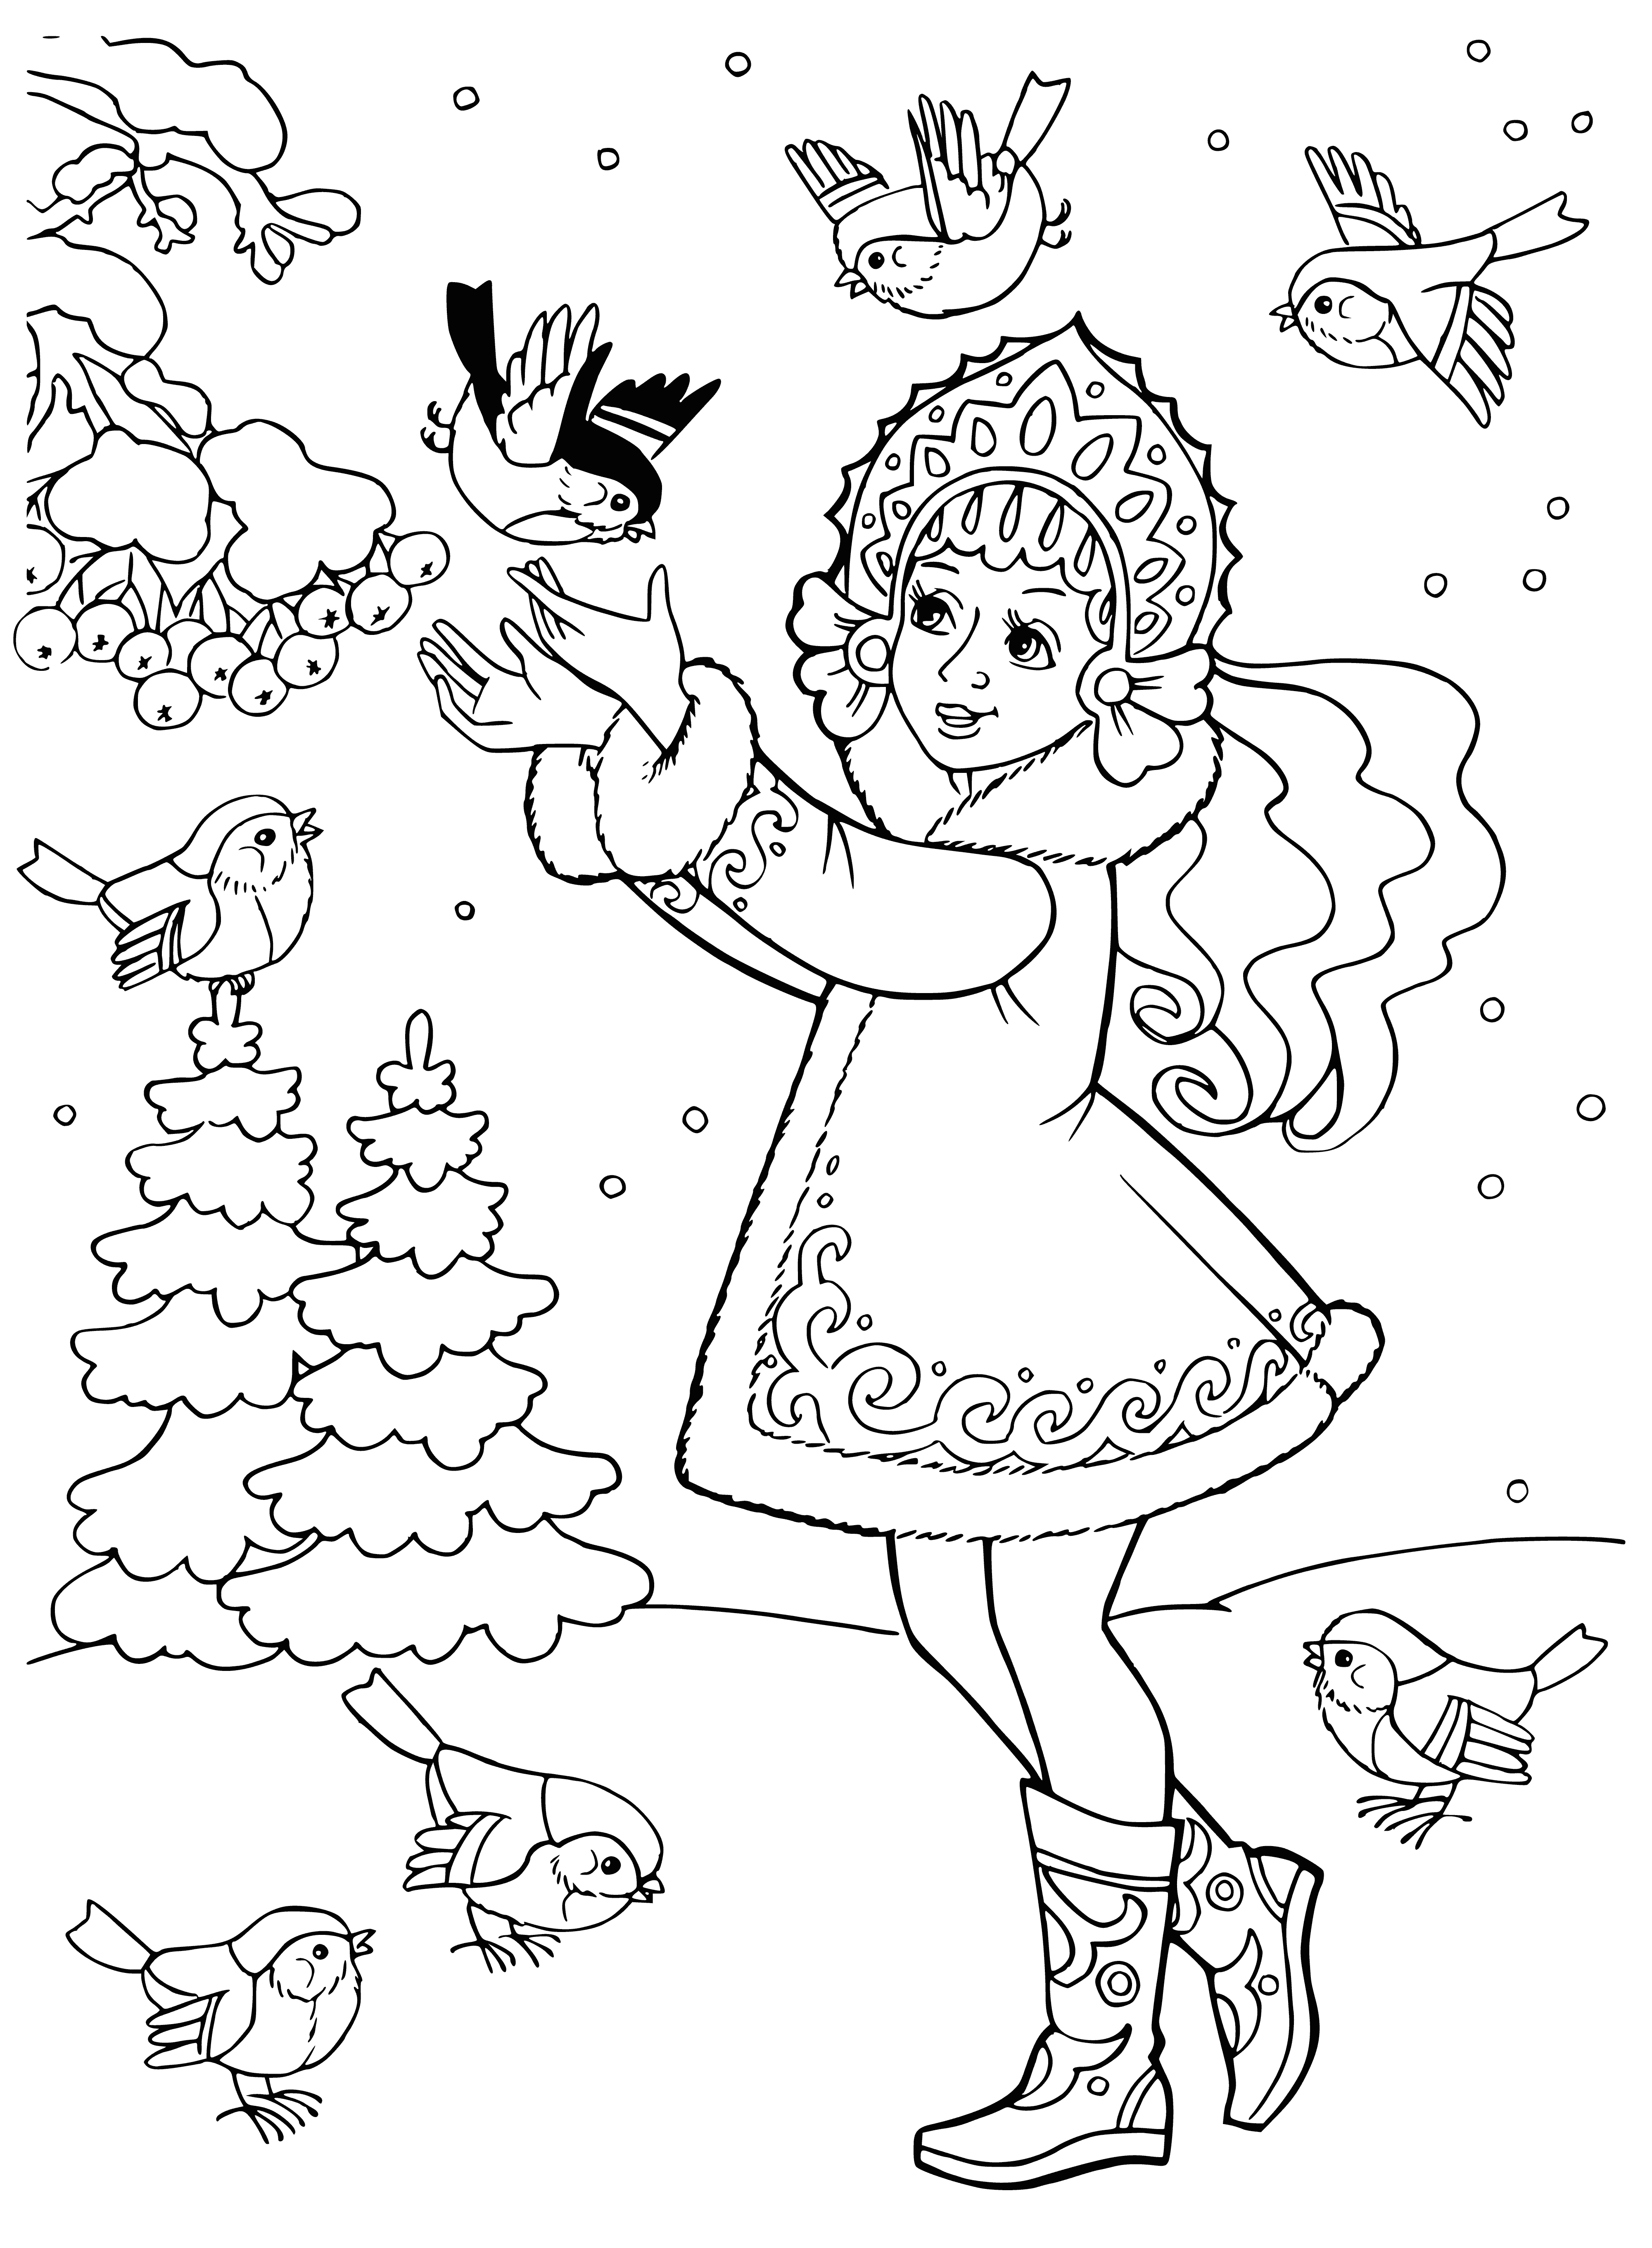 coloring page: Girl with long white hair surrounded by animals & snowflakes in winter scene, filled with magical atmosphere.